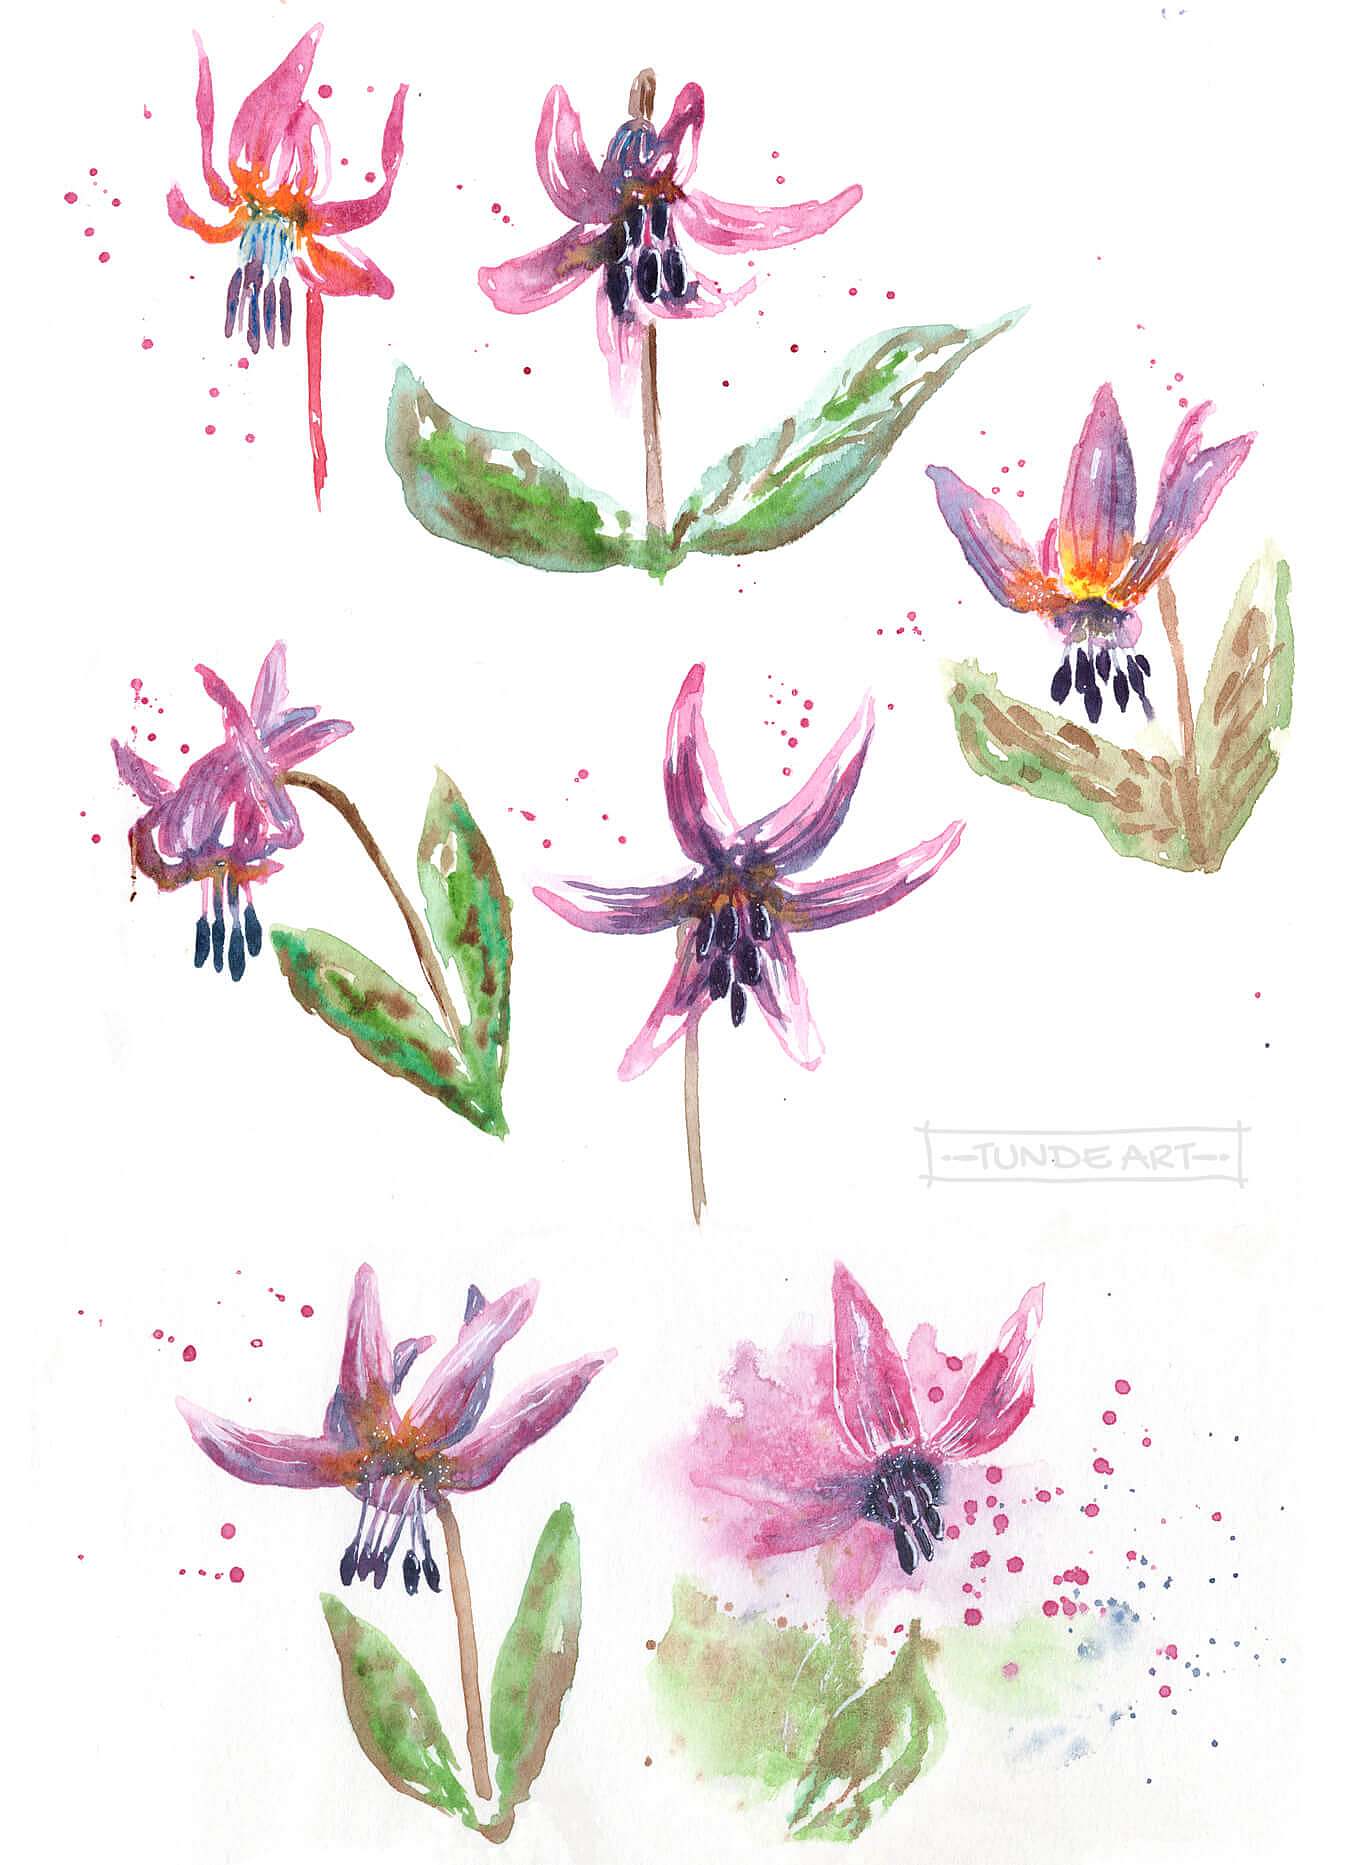 Dogtooth Violet Study by Tunde Szentes